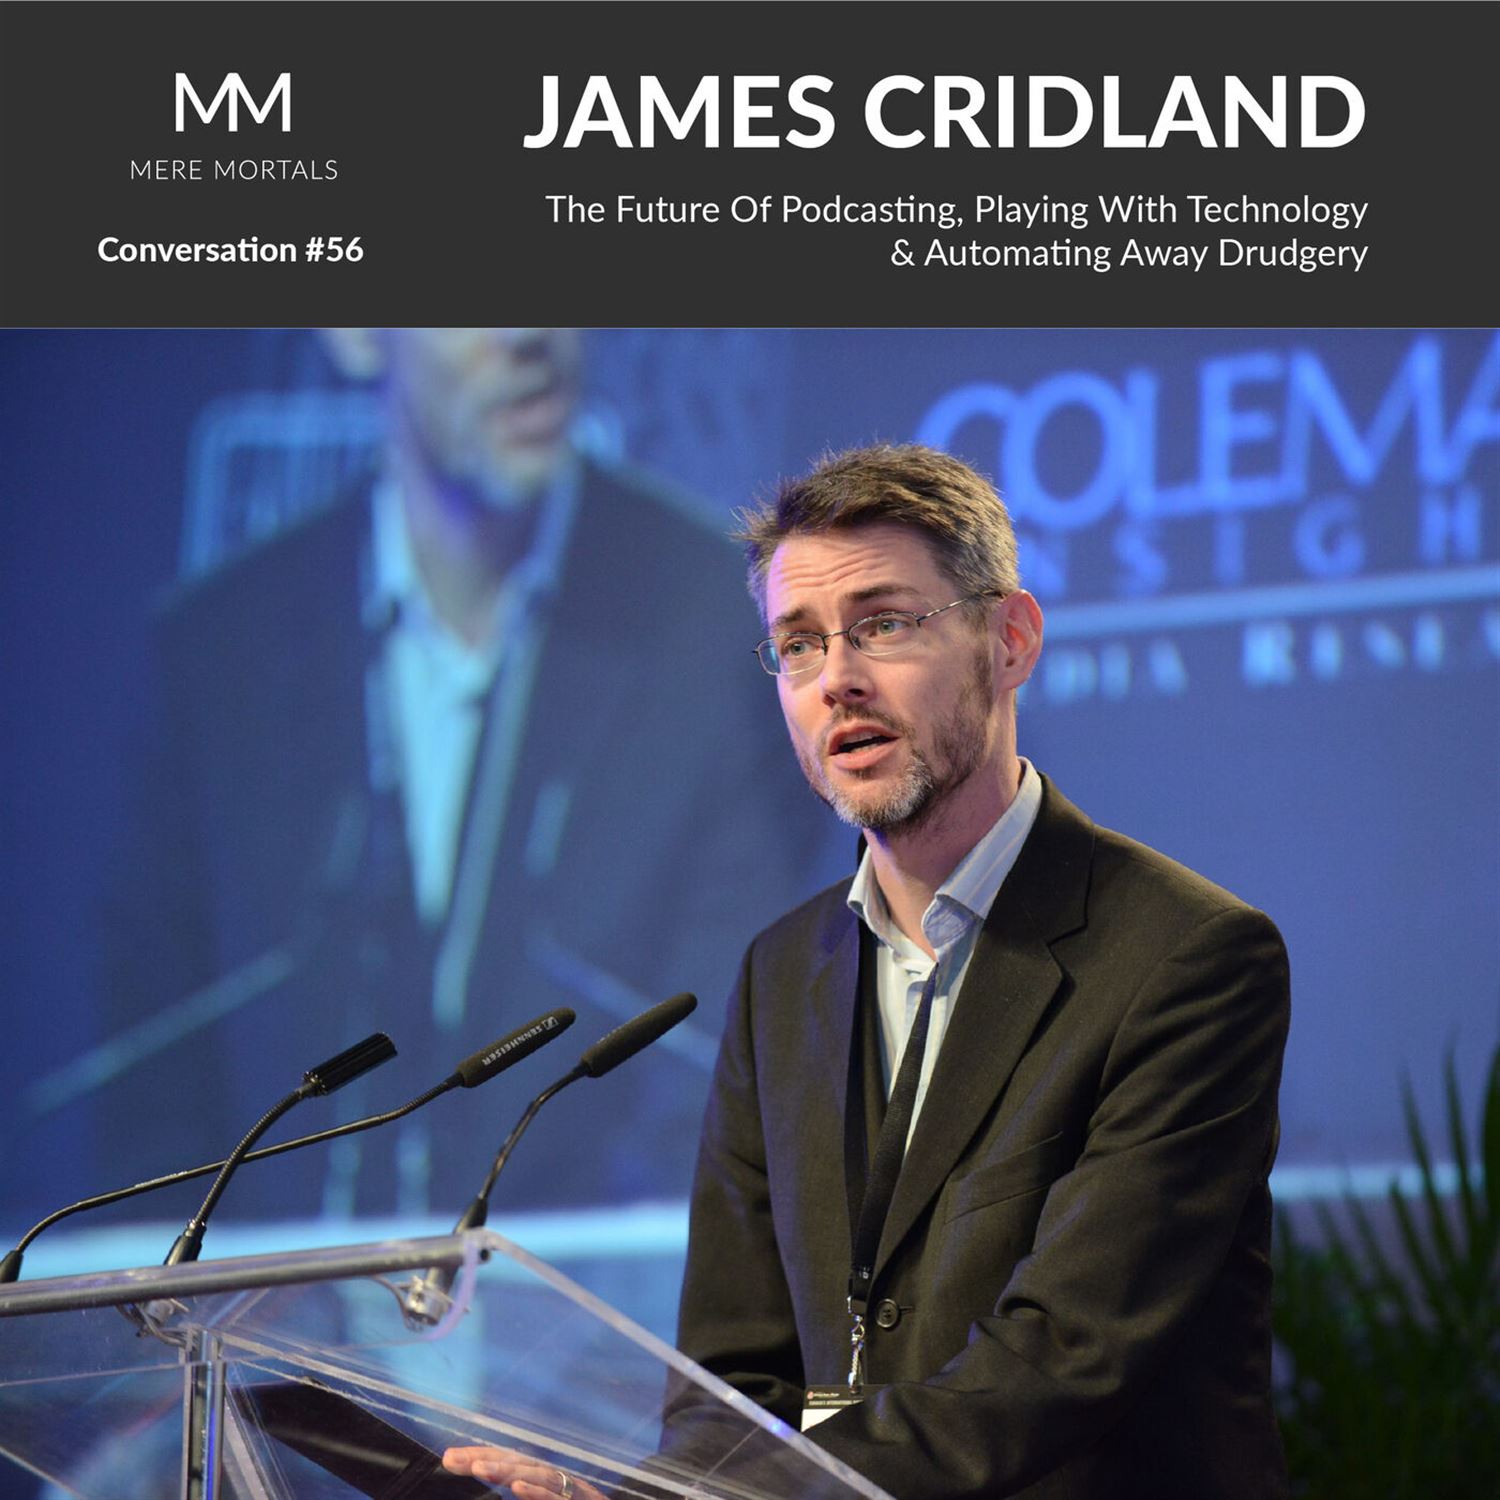 JAMES CRIDLAND | The Future Of Podcasting, Playing With Technology & Automating Away Drudgery